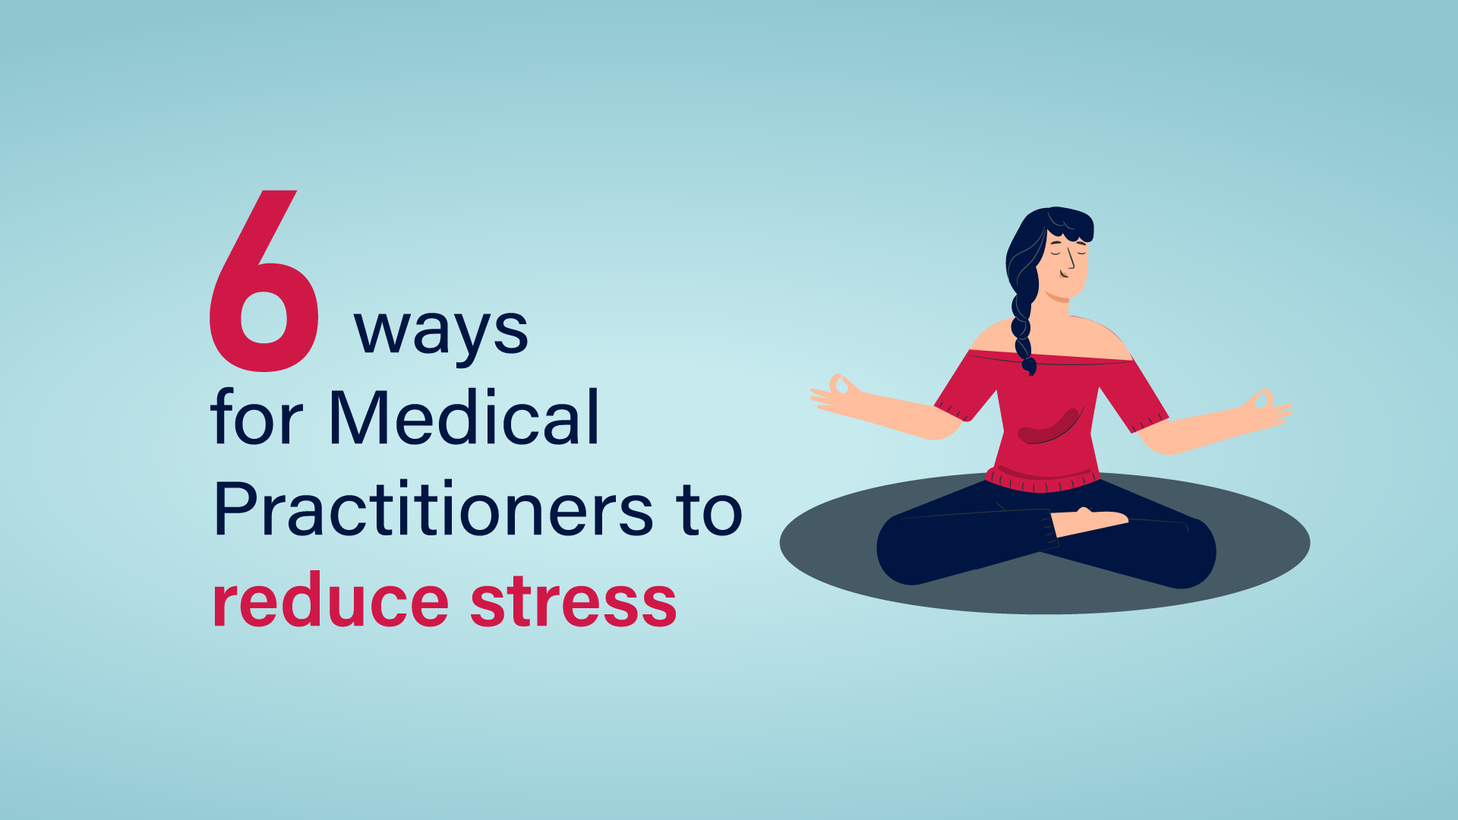 6 ways for Medical Practitioners to reduce stress